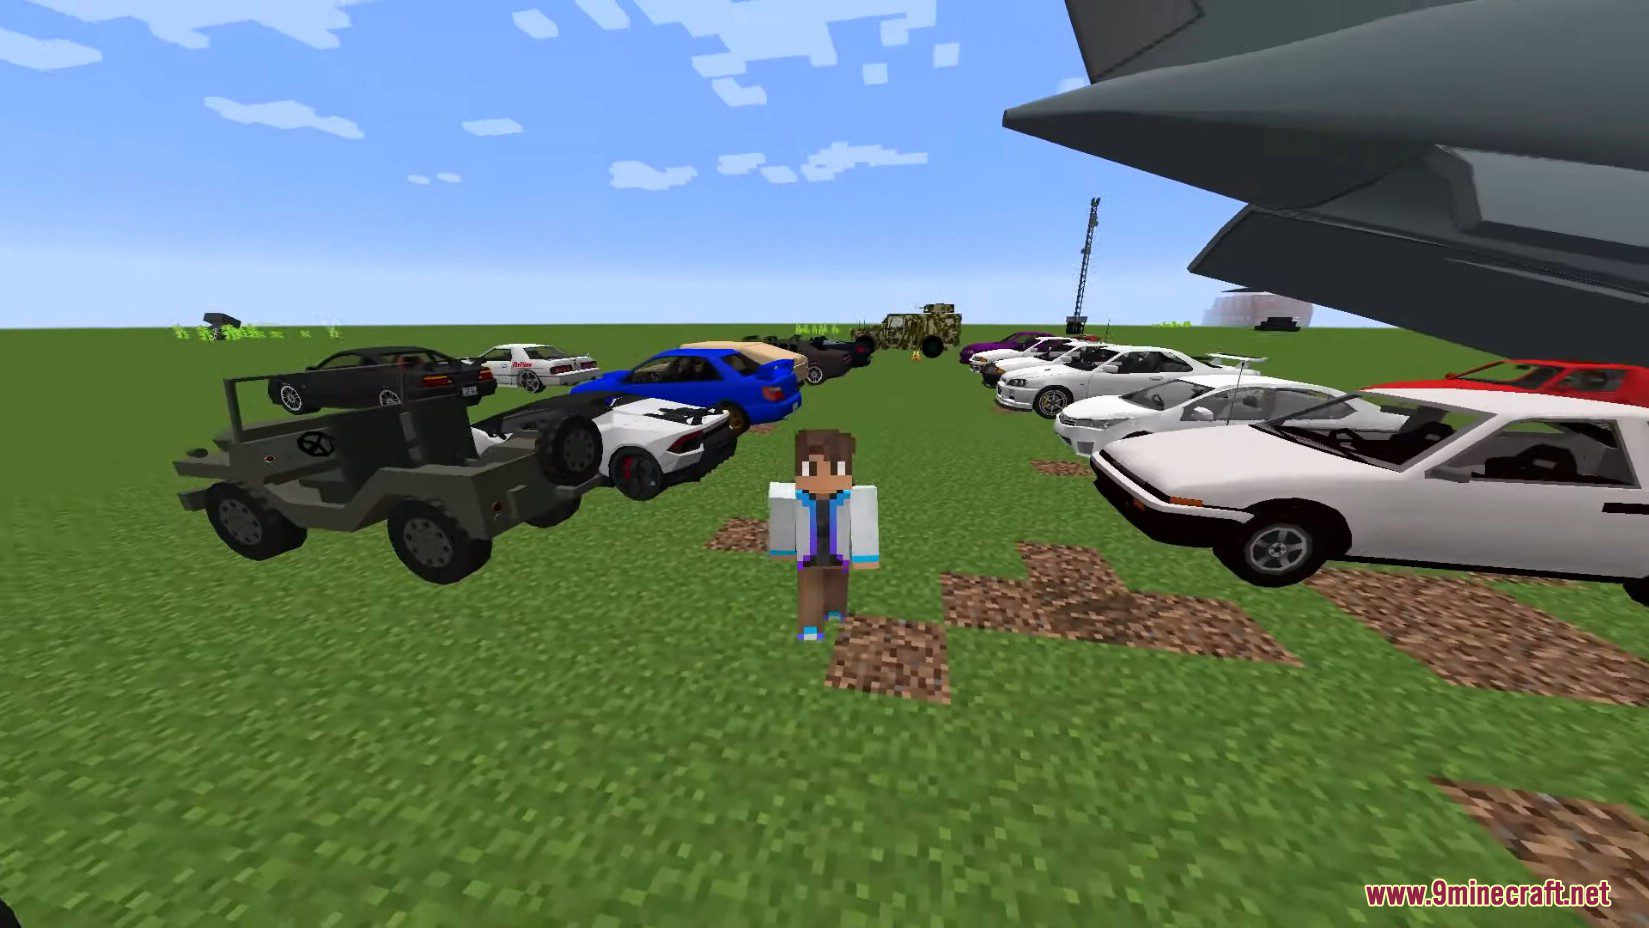 Mcheli Overdrive Mod (1.7.10) - Largest Cars and Planes Mod 4